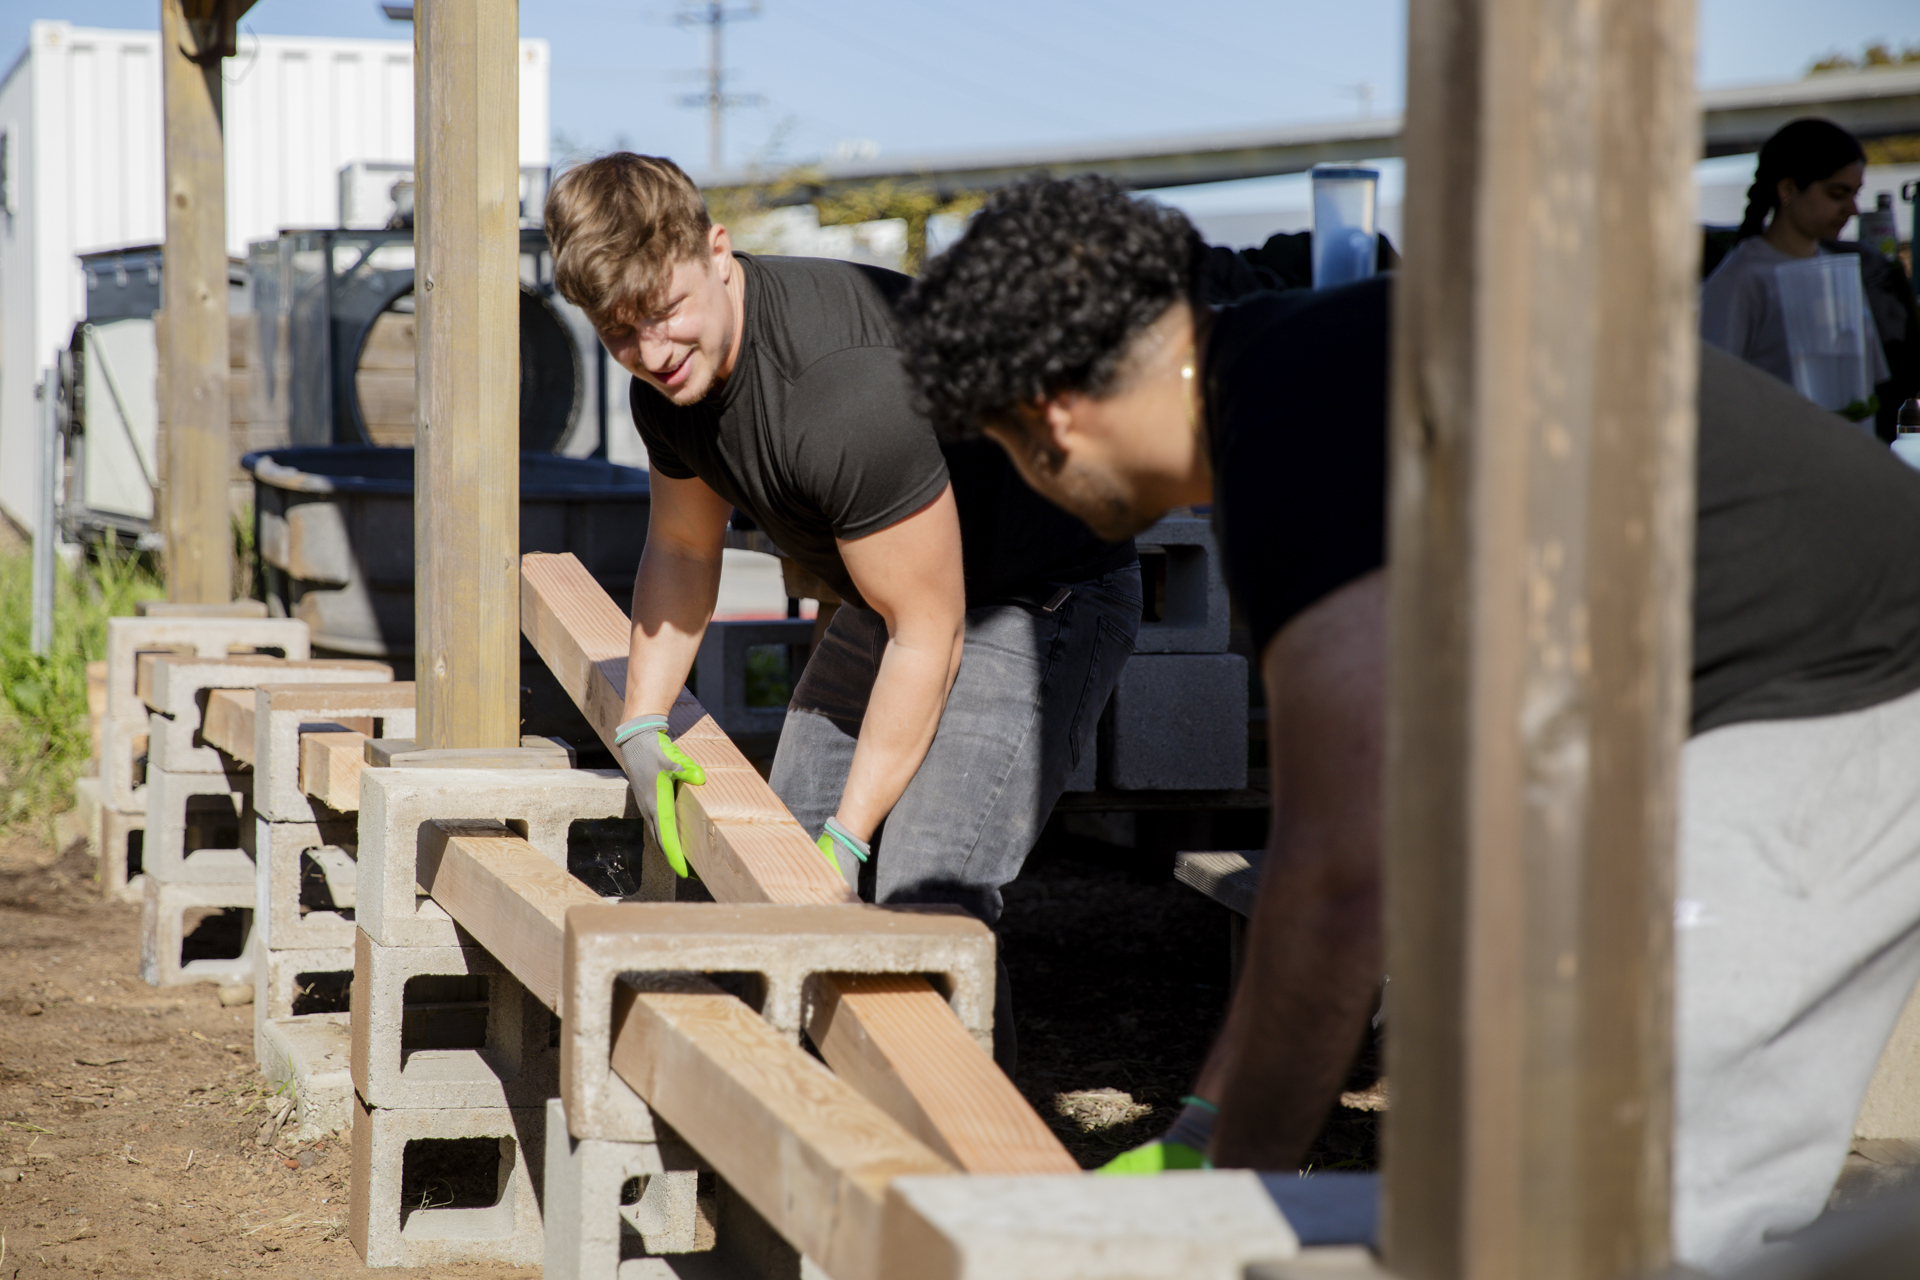 Students work on a project in the community during Alternative Spring Break.